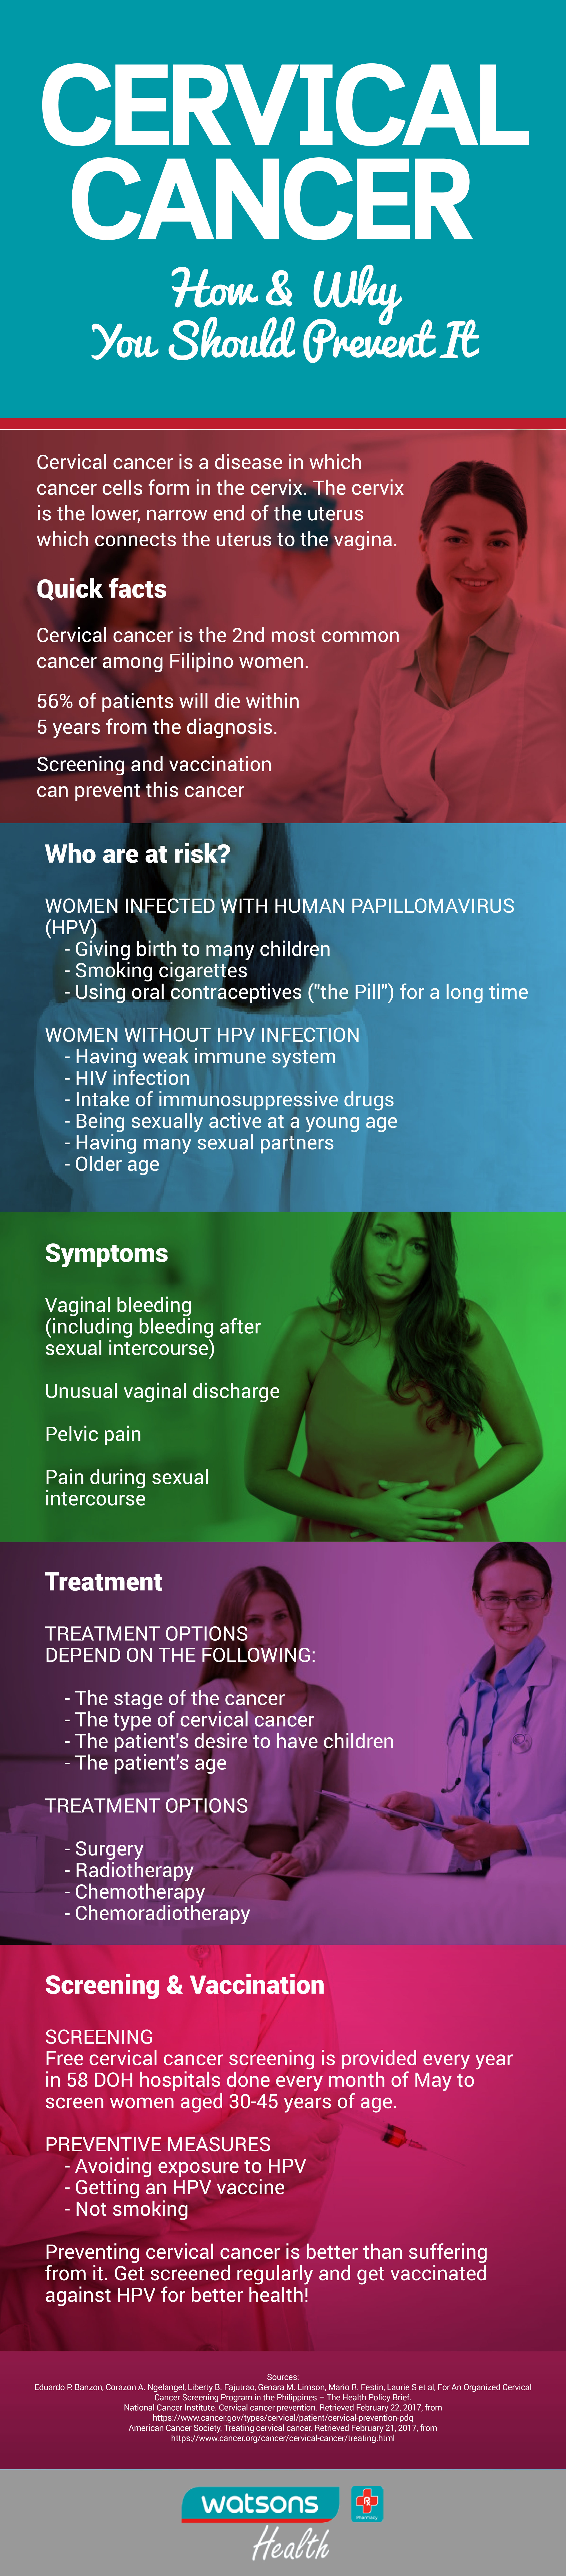 Watsons_Cervical Cancer Infographics-01